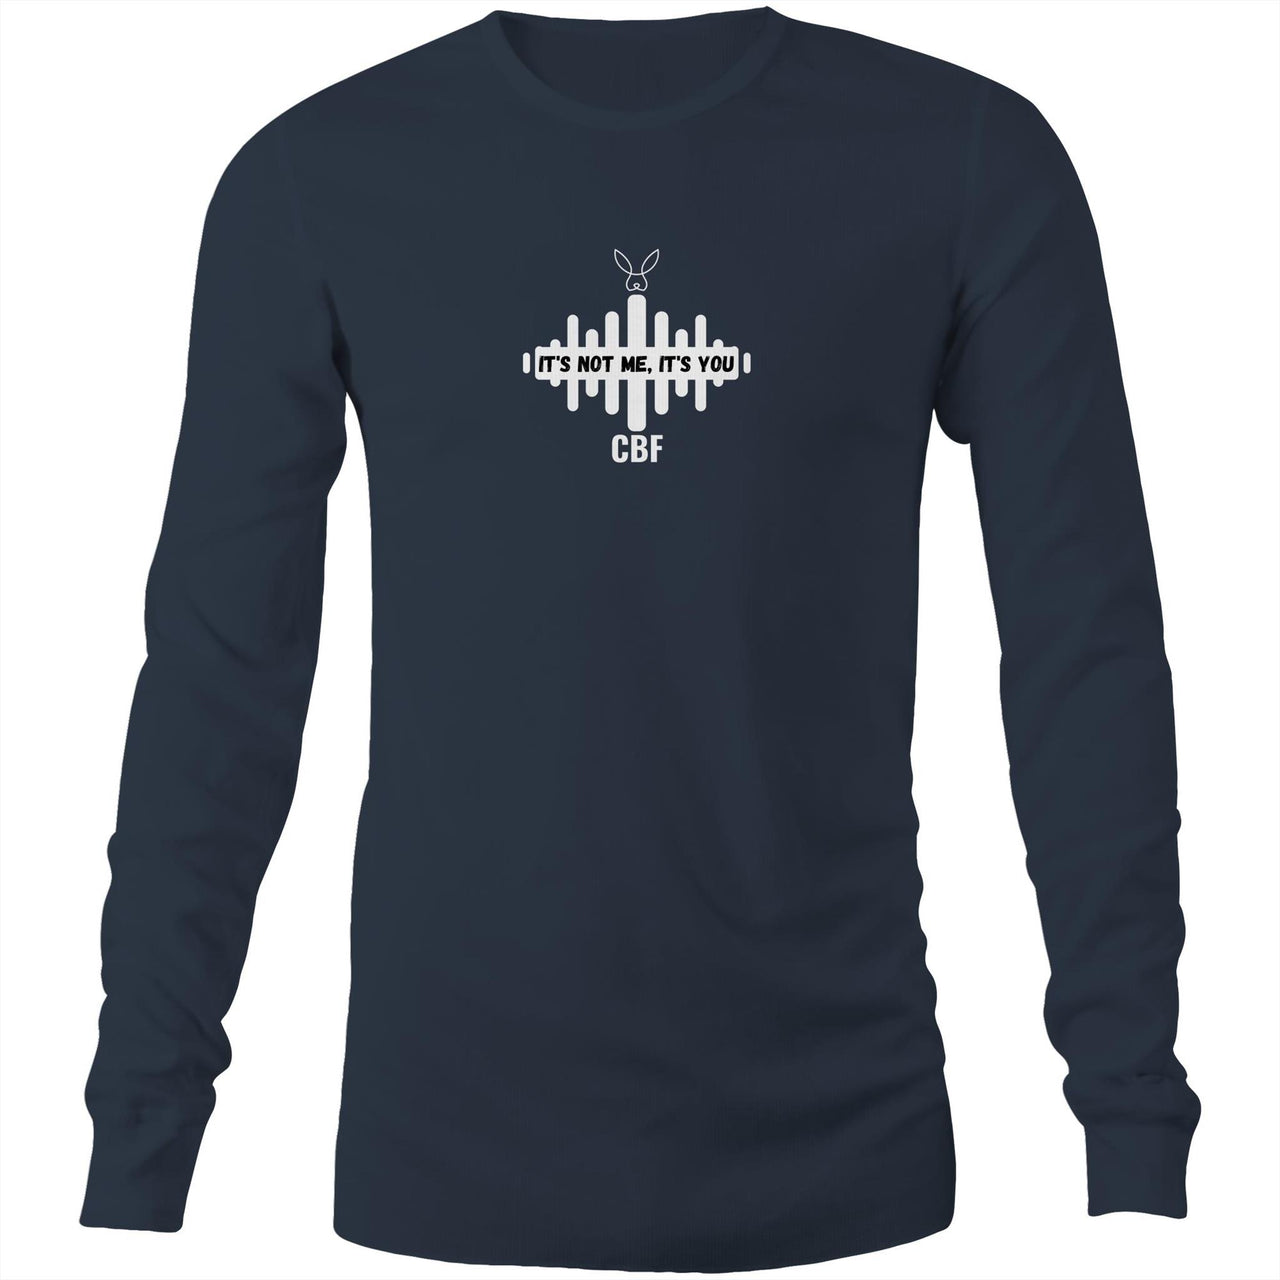 Not me It's You Long Sleeve T-Shirt by CBF Clothing in Navy